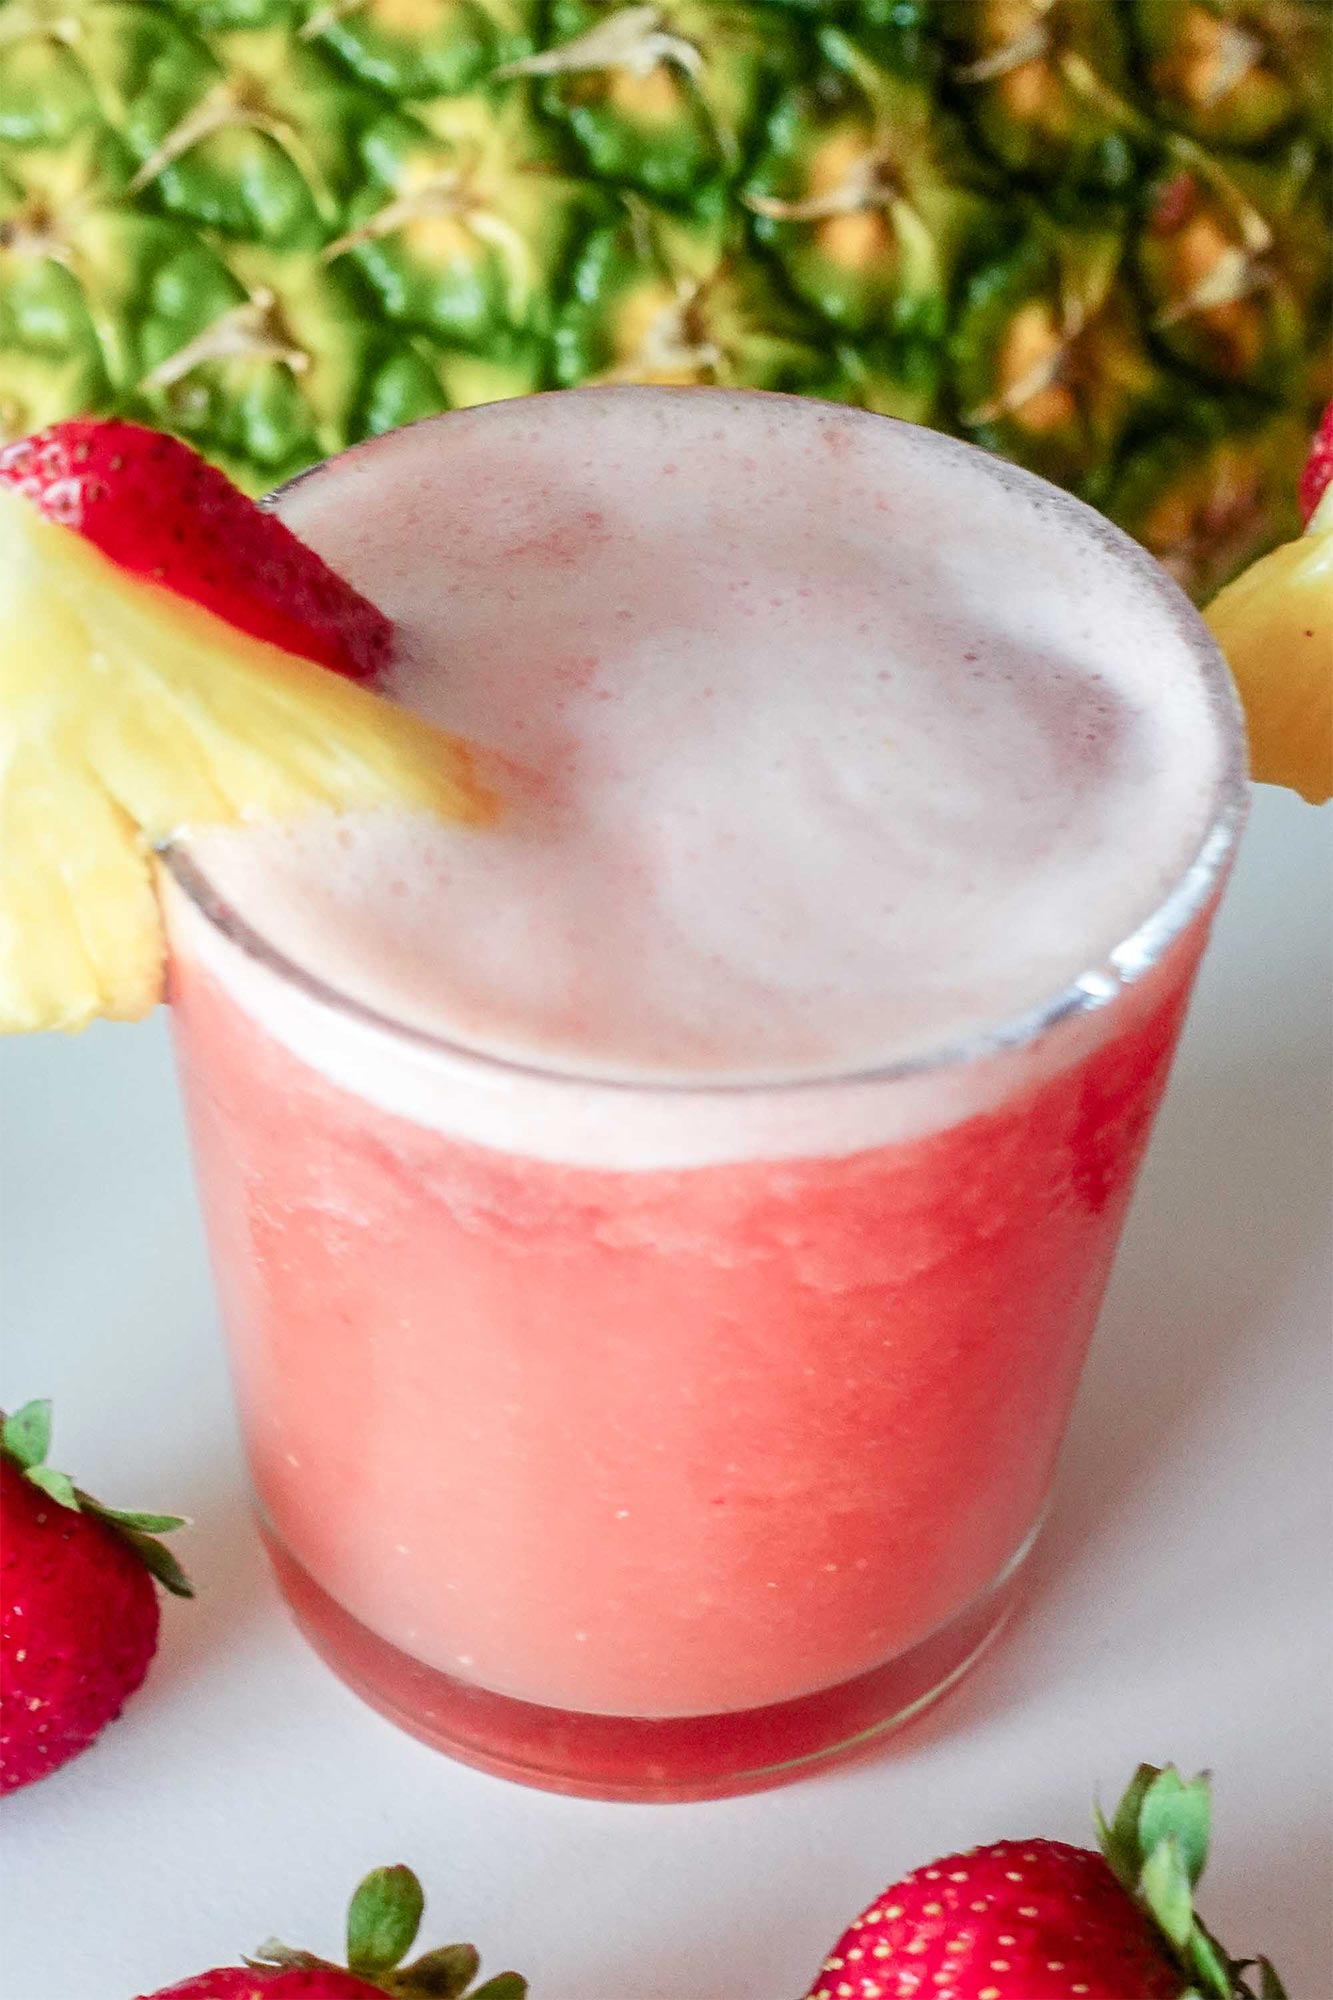 Rum Pineapple Strawberry Cocktail